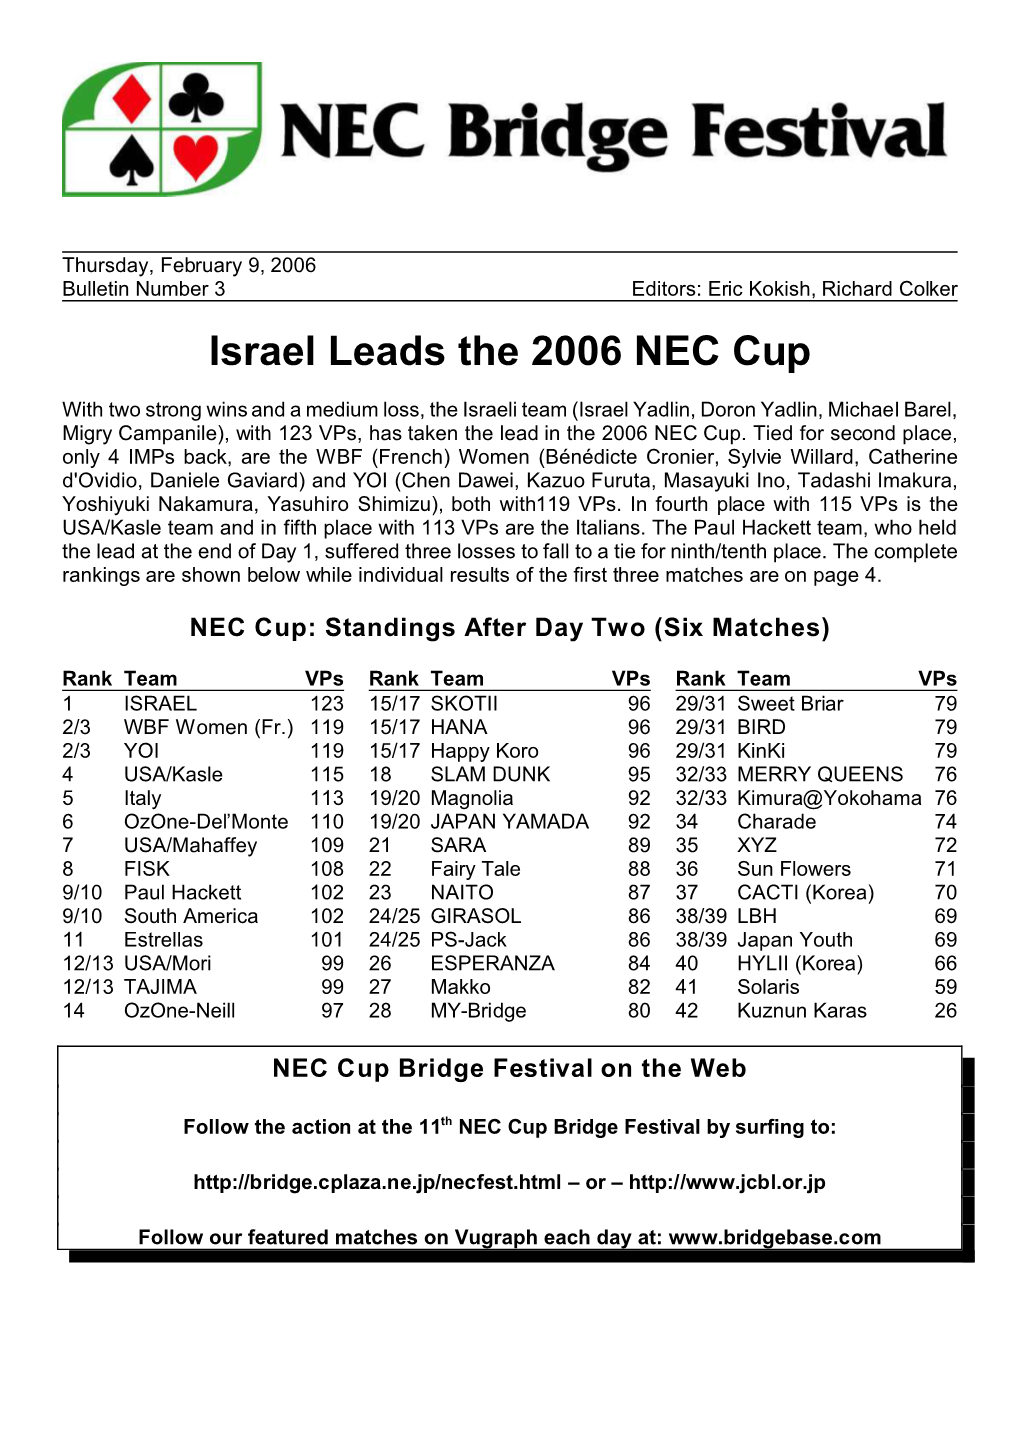 Israel Leads the 2006 NEC Cup